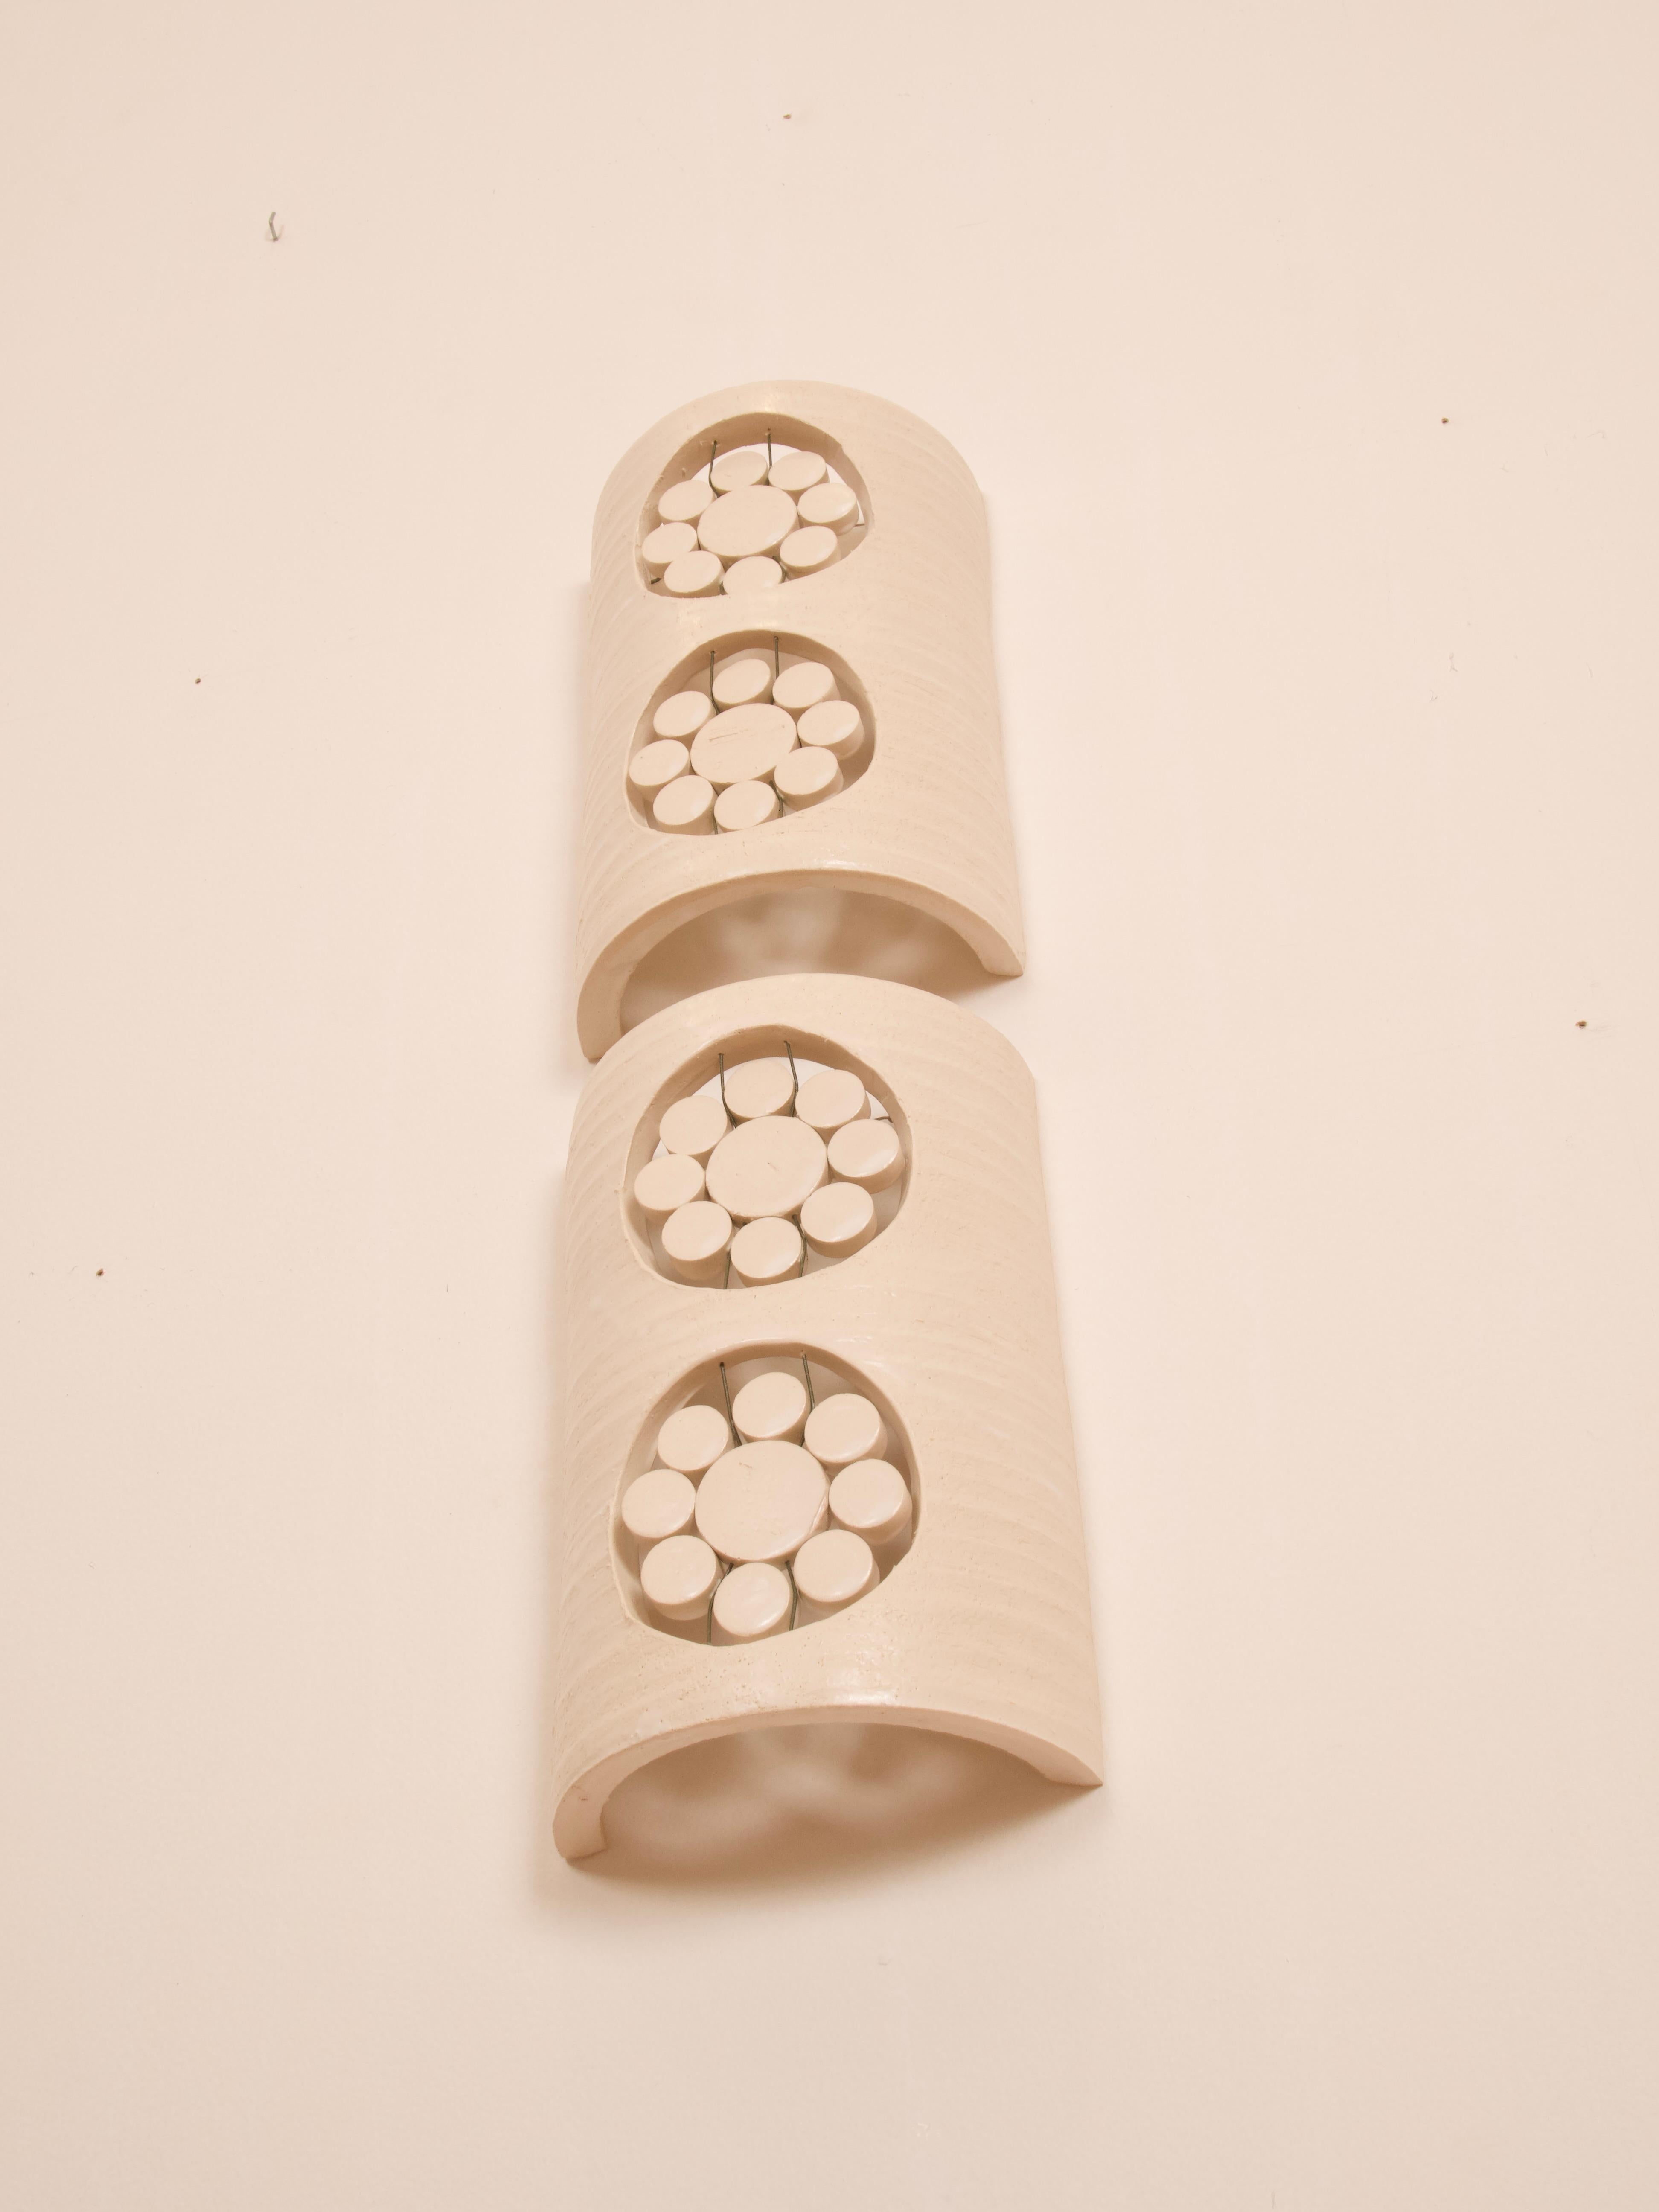 Georges Pelletier 2 Flowers Sconces in White Enameled Ceramic In New Condition In Santa Gertrudis, Baleares